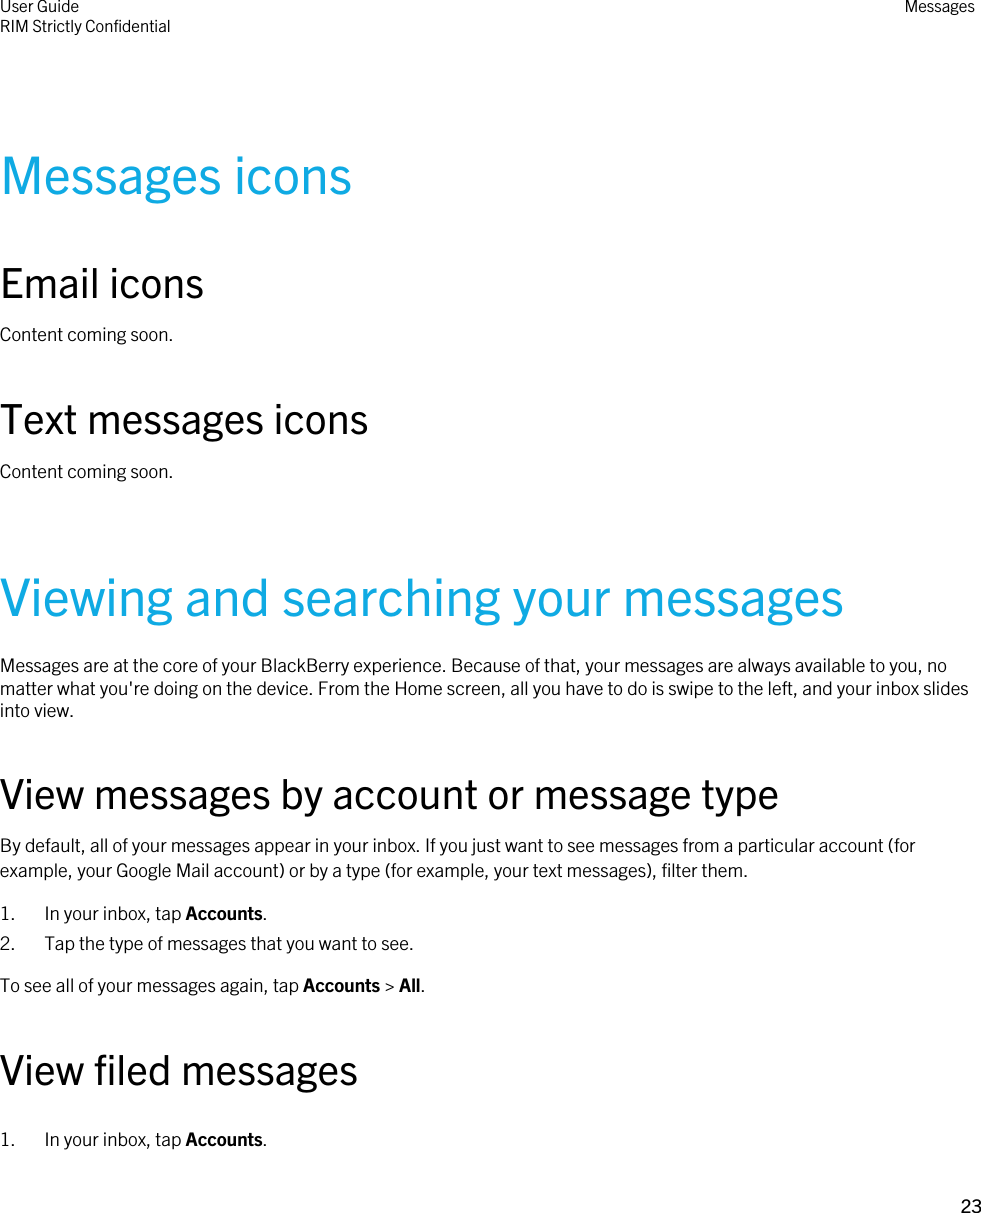 Messages iconsEmail iconsContent coming soon.Text messages iconsContent coming soon.Viewing and searching your messagesMessages are at the core of your BlackBerry experience. Because of that, your messages are always available to you, no matter what you&apos;re doing on the device. From the Home screen, all you have to do is swipe to the left, and your inbox slides into view.View messages by account or message typeBy default, all of your messages appear in your inbox. If you just want to see messages from a particular account (for example, your Google Mail account) or by a type (for example, your text messages), filter them.1. In your inbox, tap Accounts.2. Tap the type of messages that you want to see.To see all of your messages again, tap Accounts &gt; All.View filed messages1. In your inbox, tap Accounts.User GuideRIM Strictly Confidential Messages23 